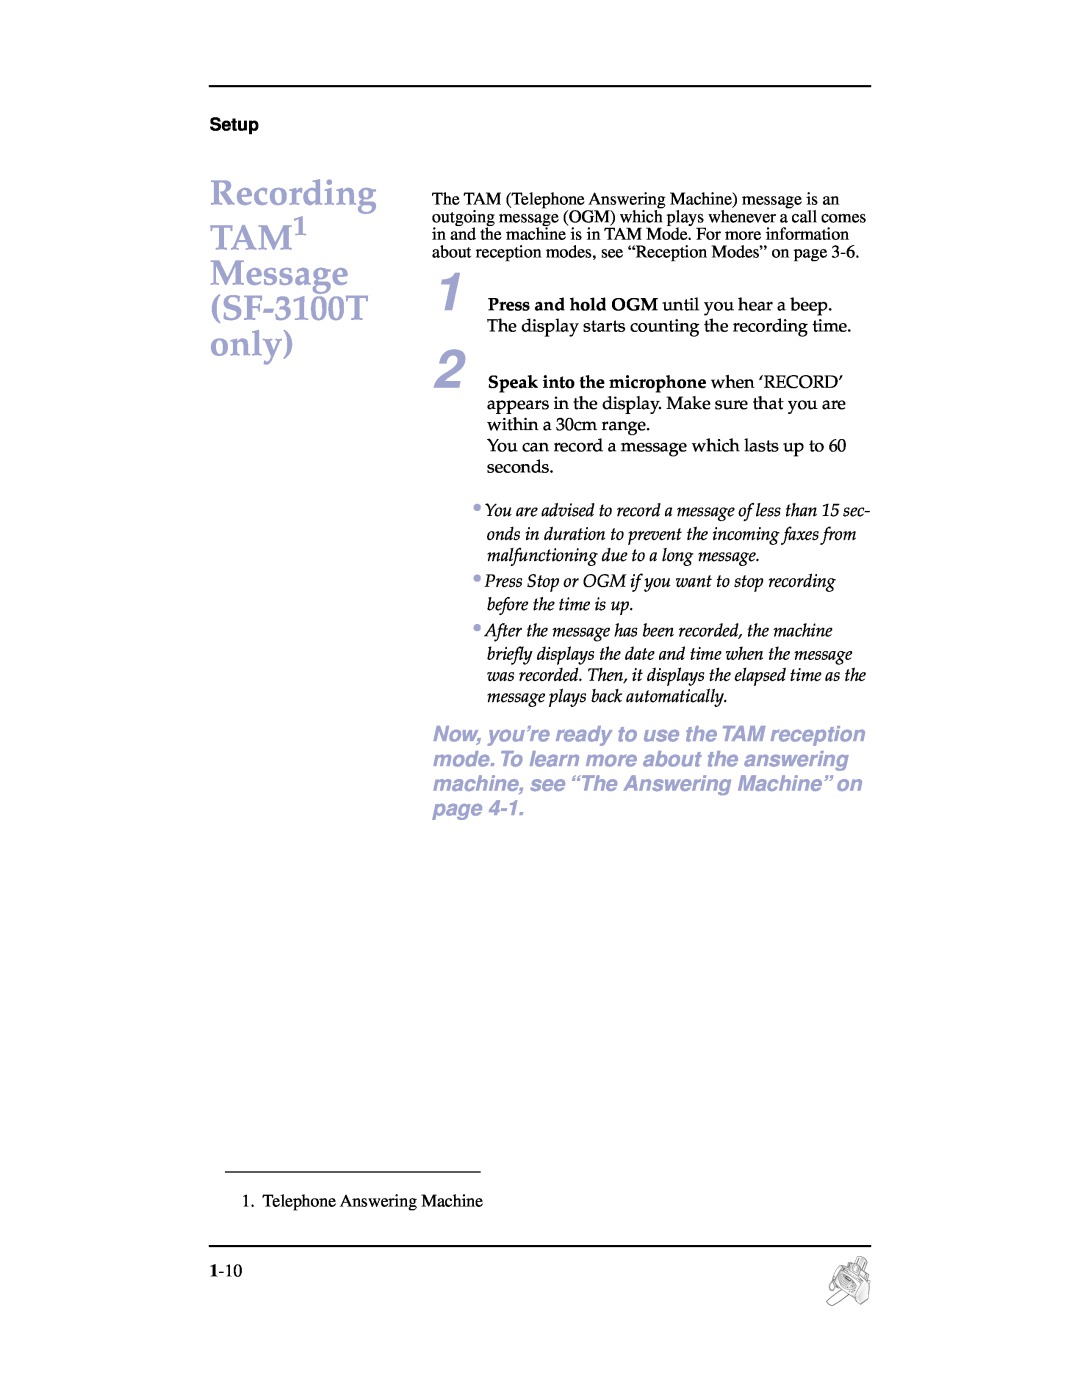 Samsung manual Recording TAM1 Message SF-3100T only, Setup 